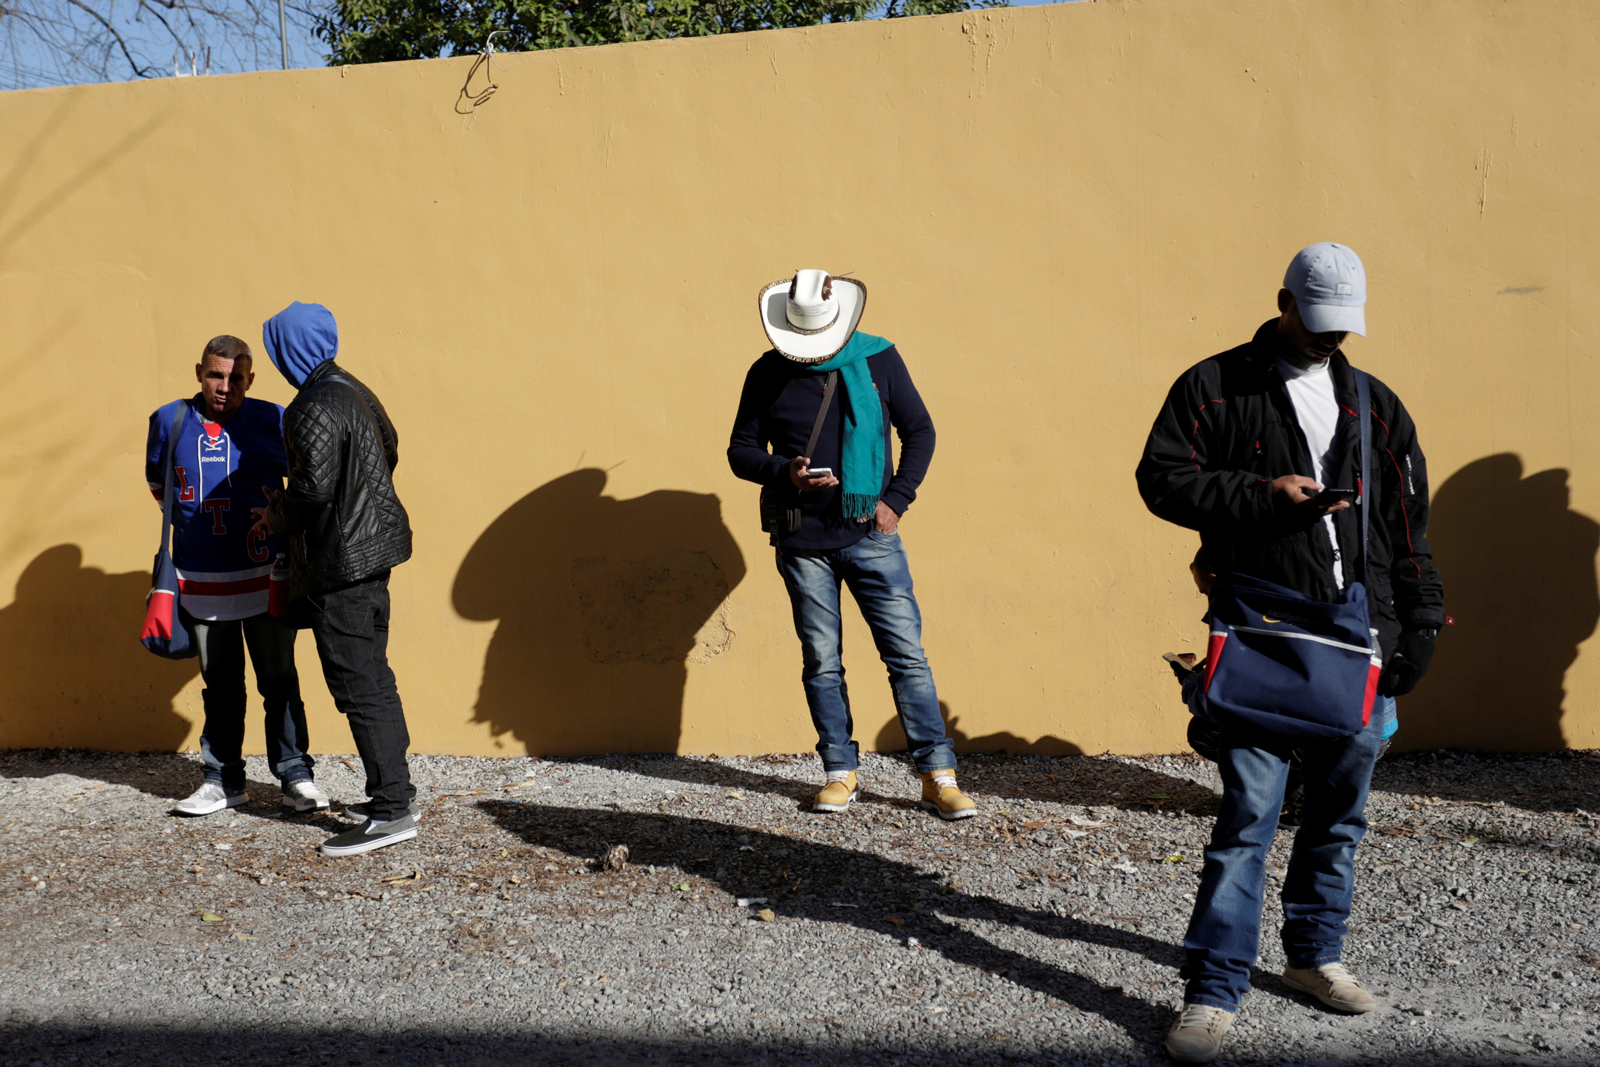 Cuban migrants stranded on their way to the US, Nuevo Laredo, Mexico, February 16, 2017